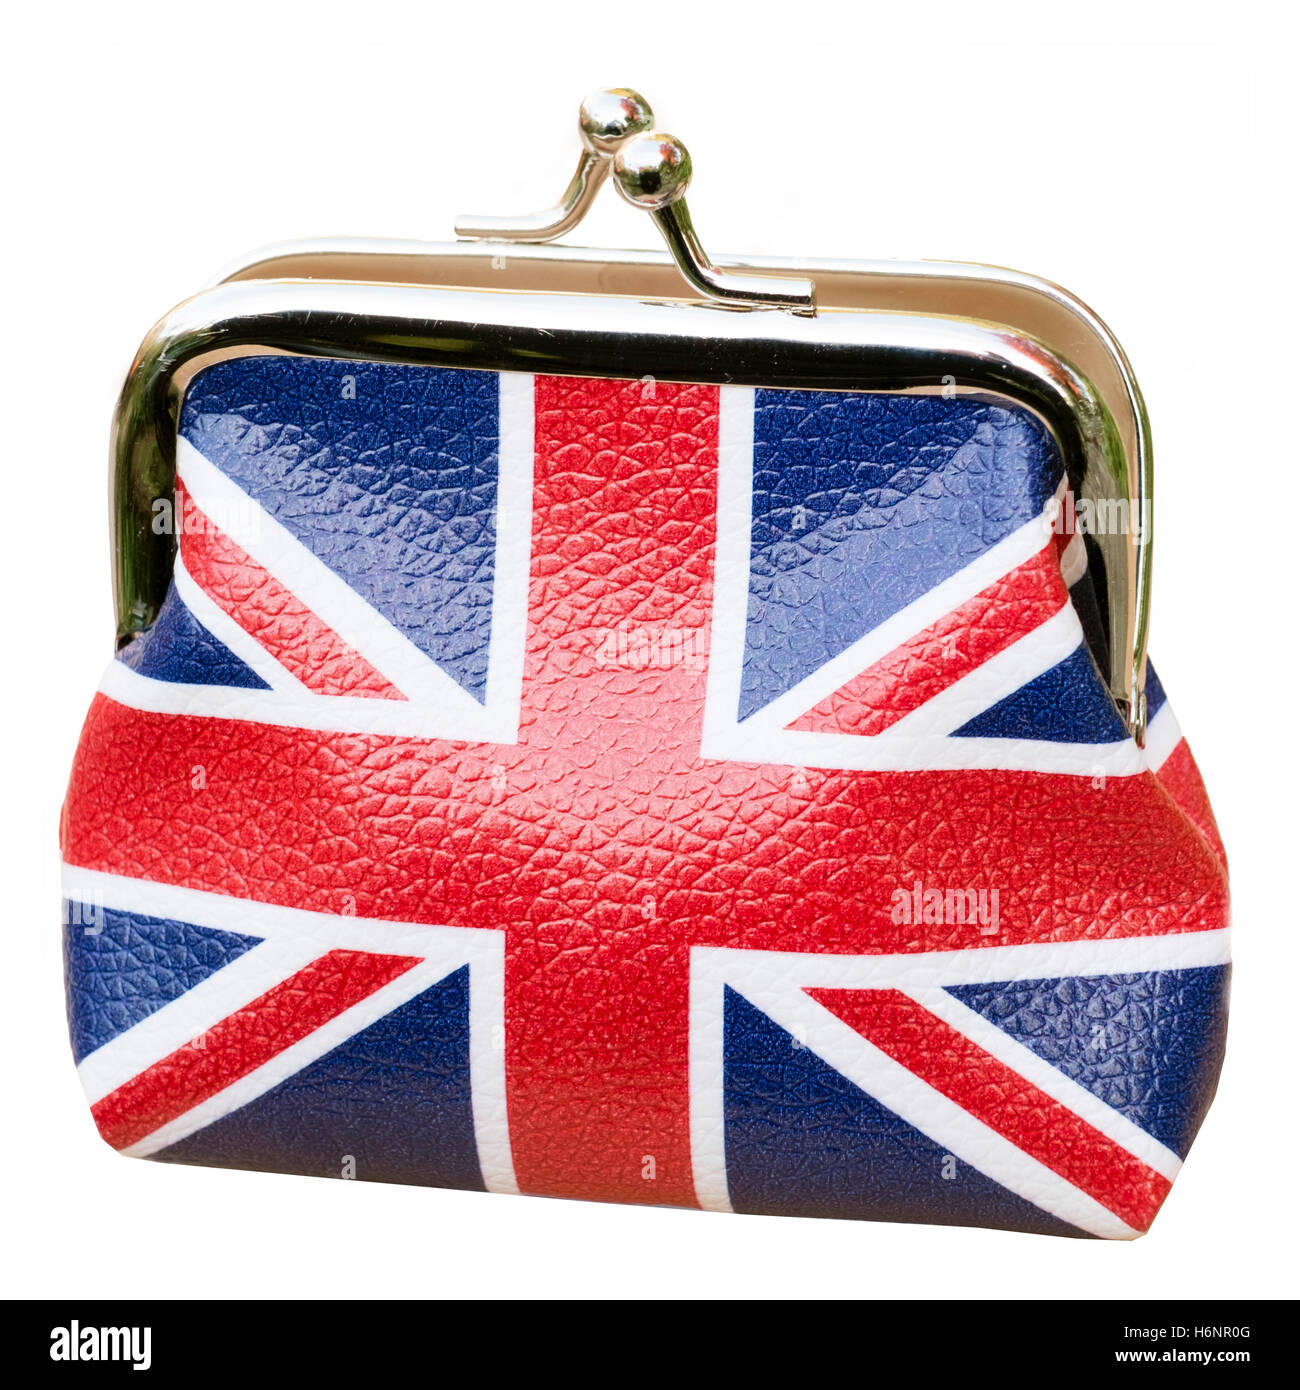 British Union Jack Flag London Icons Travel Small Card Coin Zipped Purse 